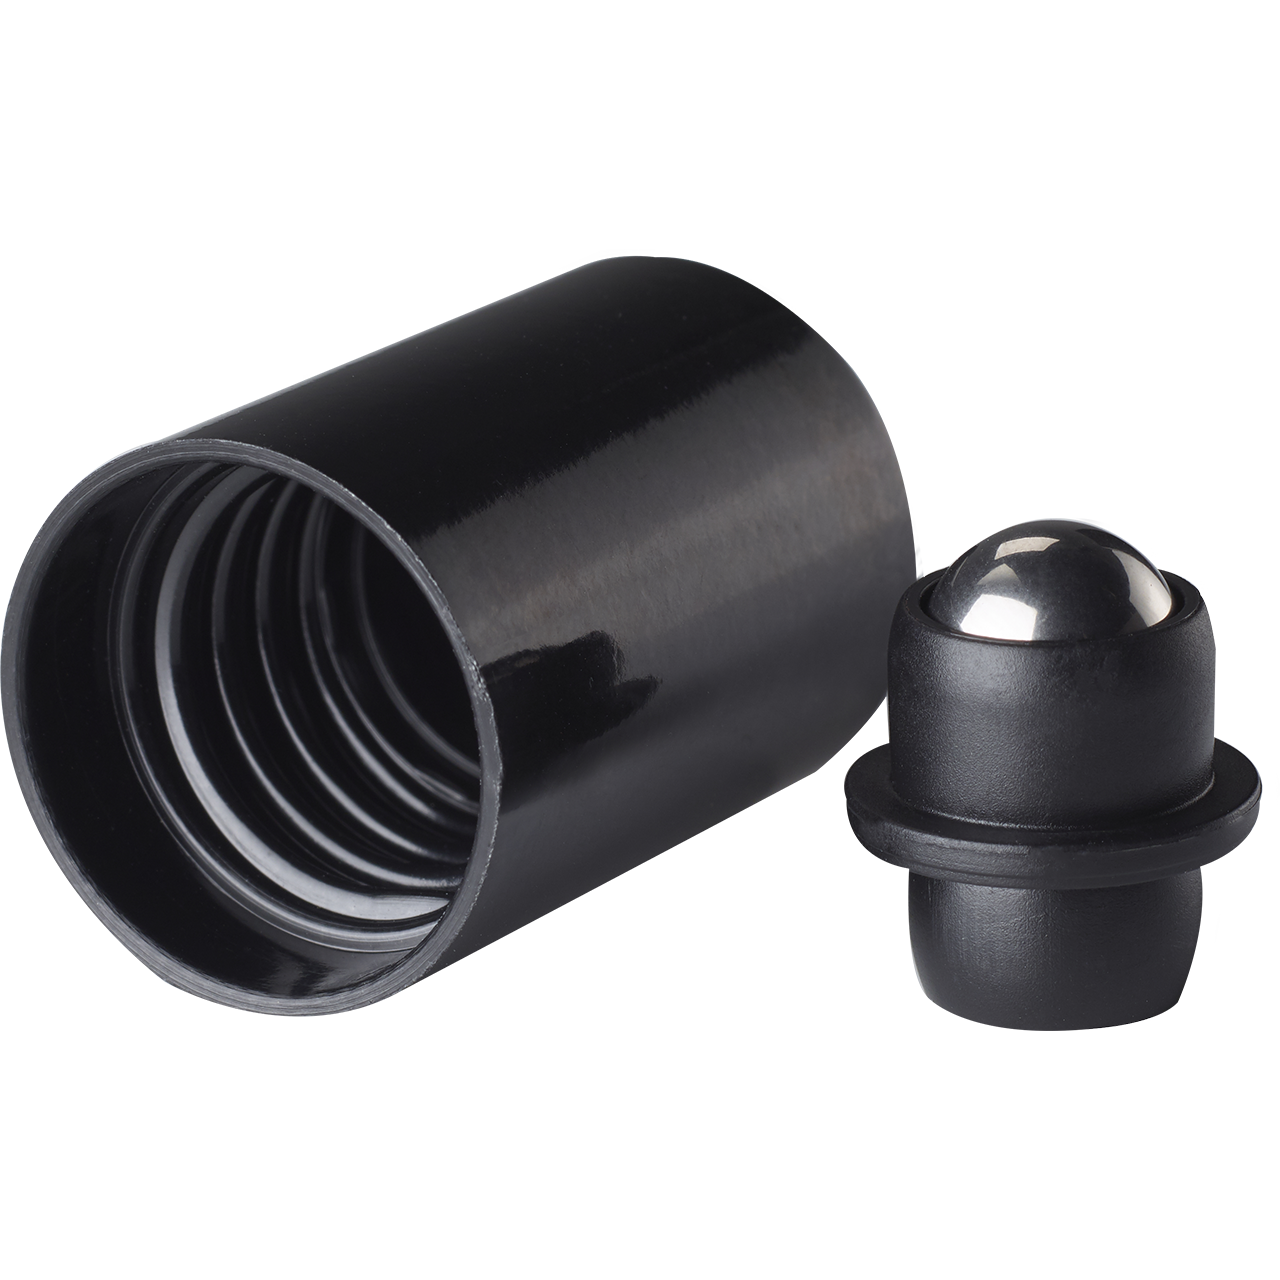 Roll-on cap DIN18, Urea, black fitment with stainless steel ball, black cap (for Orion 5-100 ml)